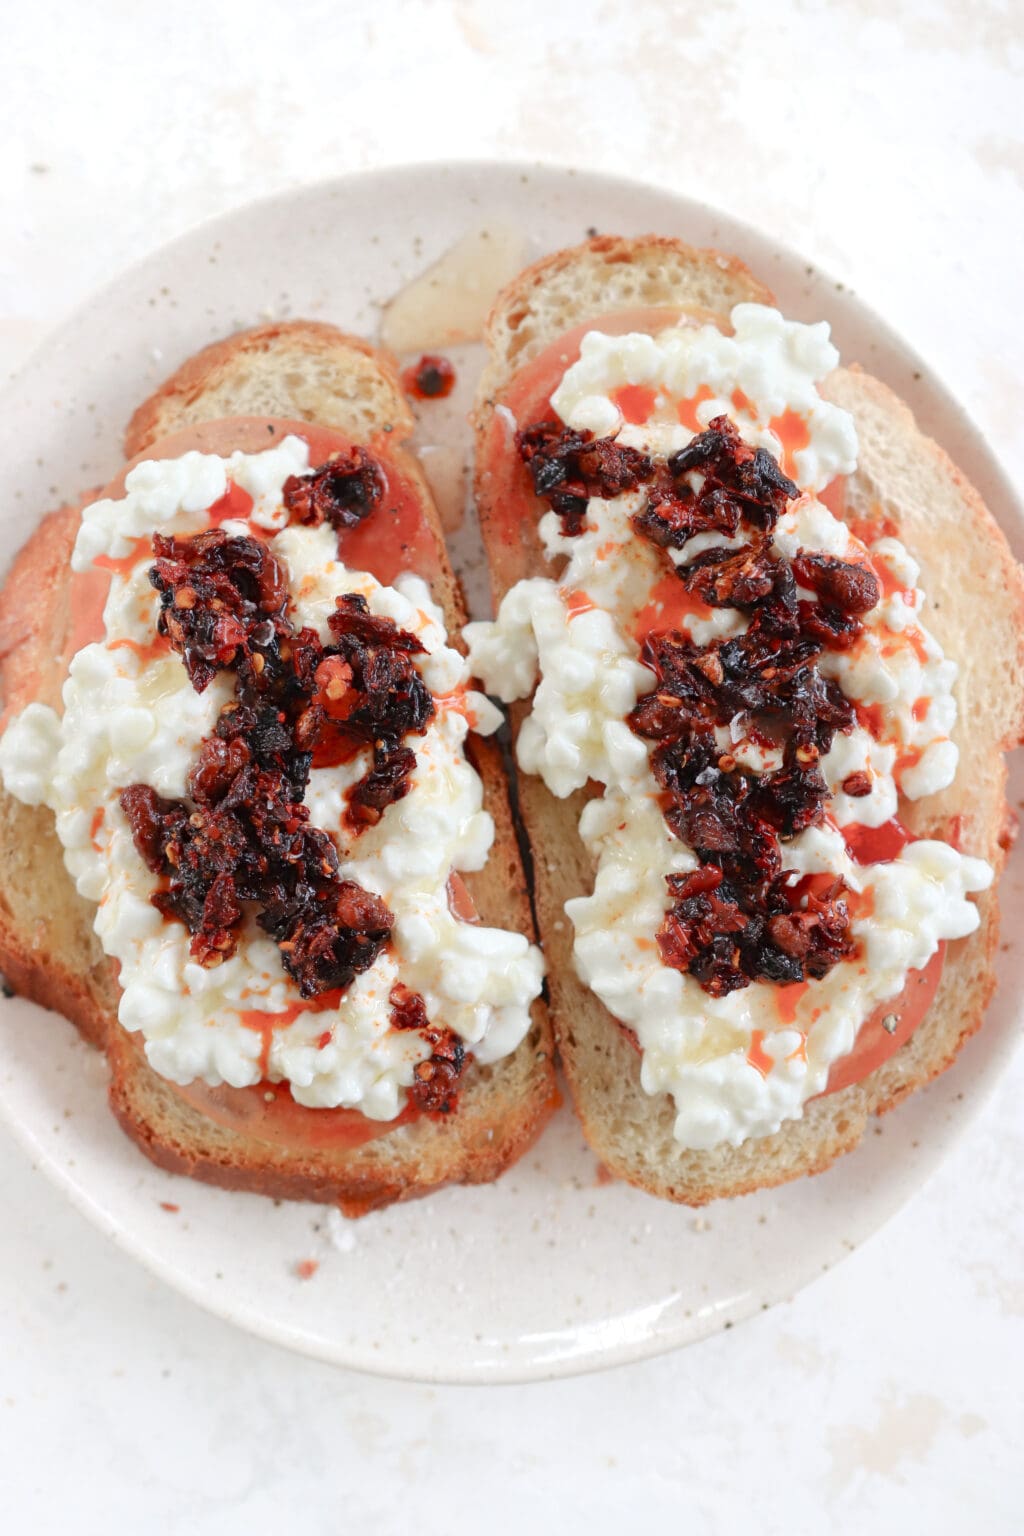 Two pieces of toast topped with tomato, cottage cheese, chili crisp oil and honey on a plate